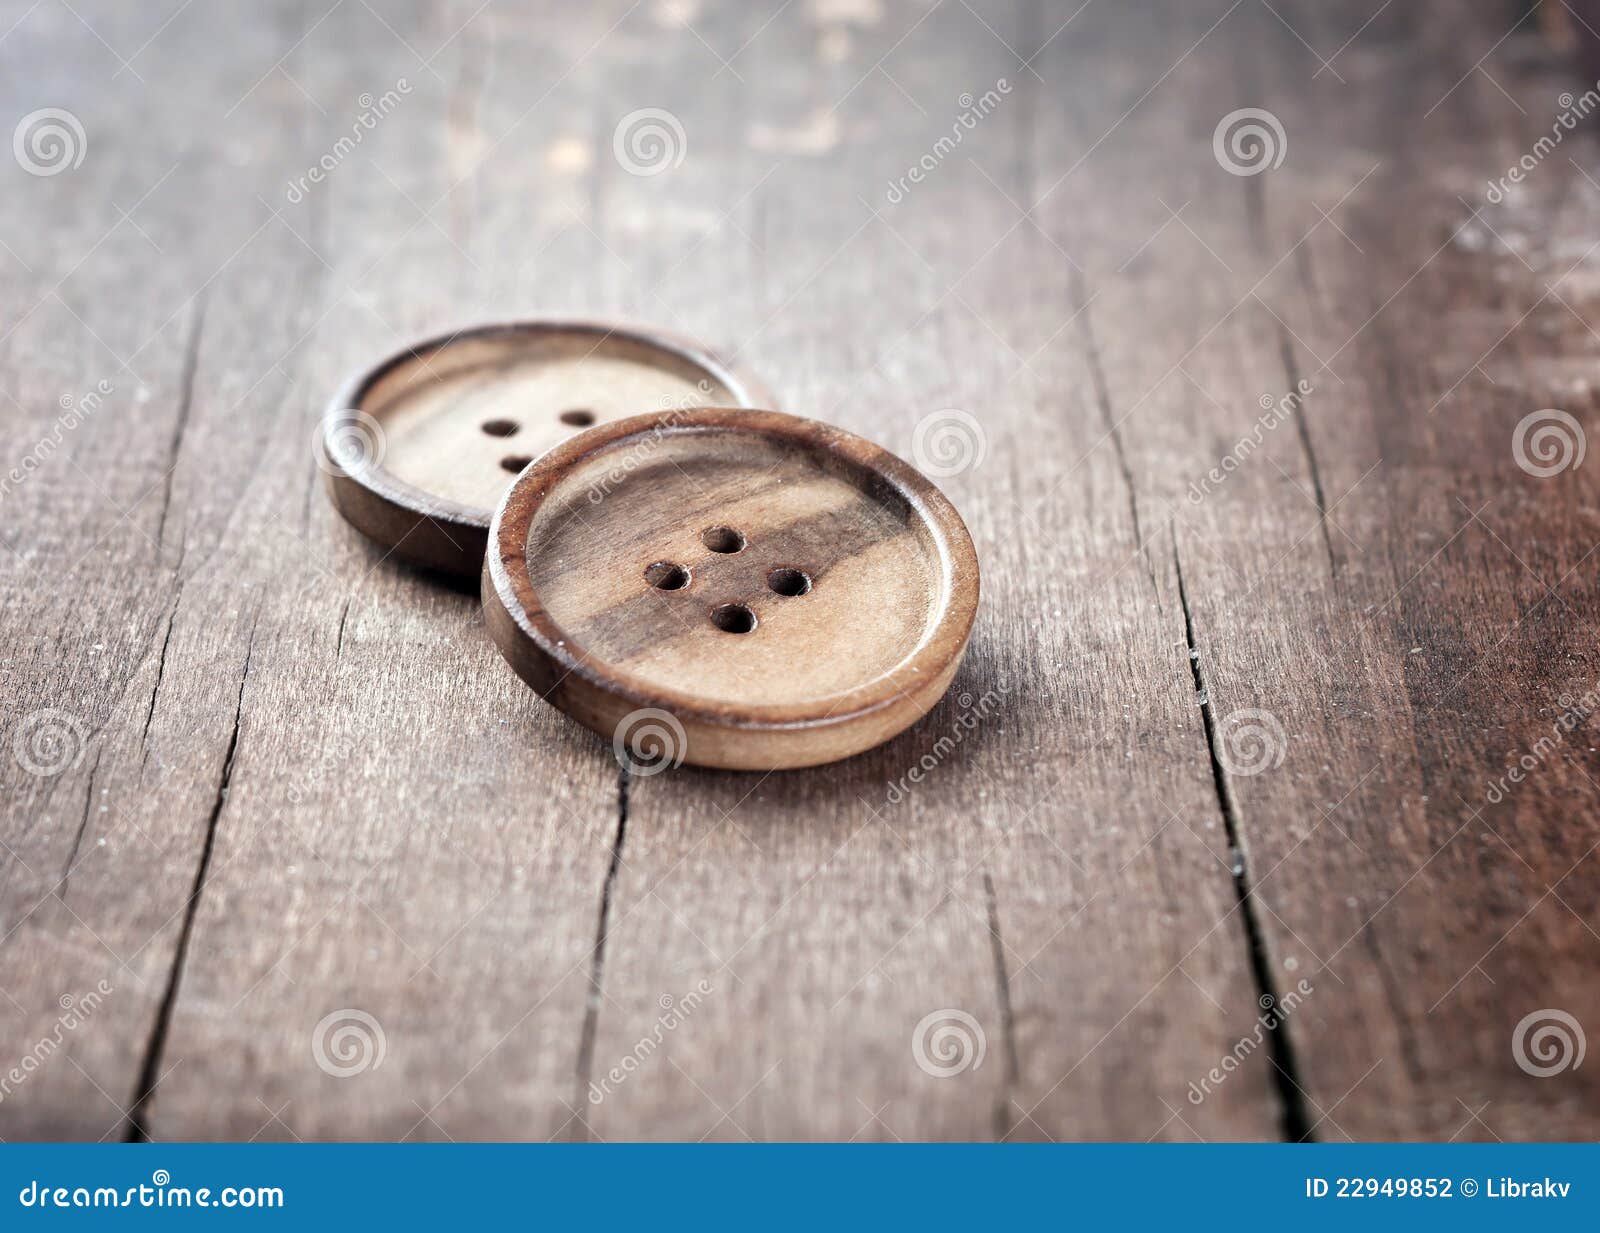 Button on a wooden table stock photo. Image of object - 22949852